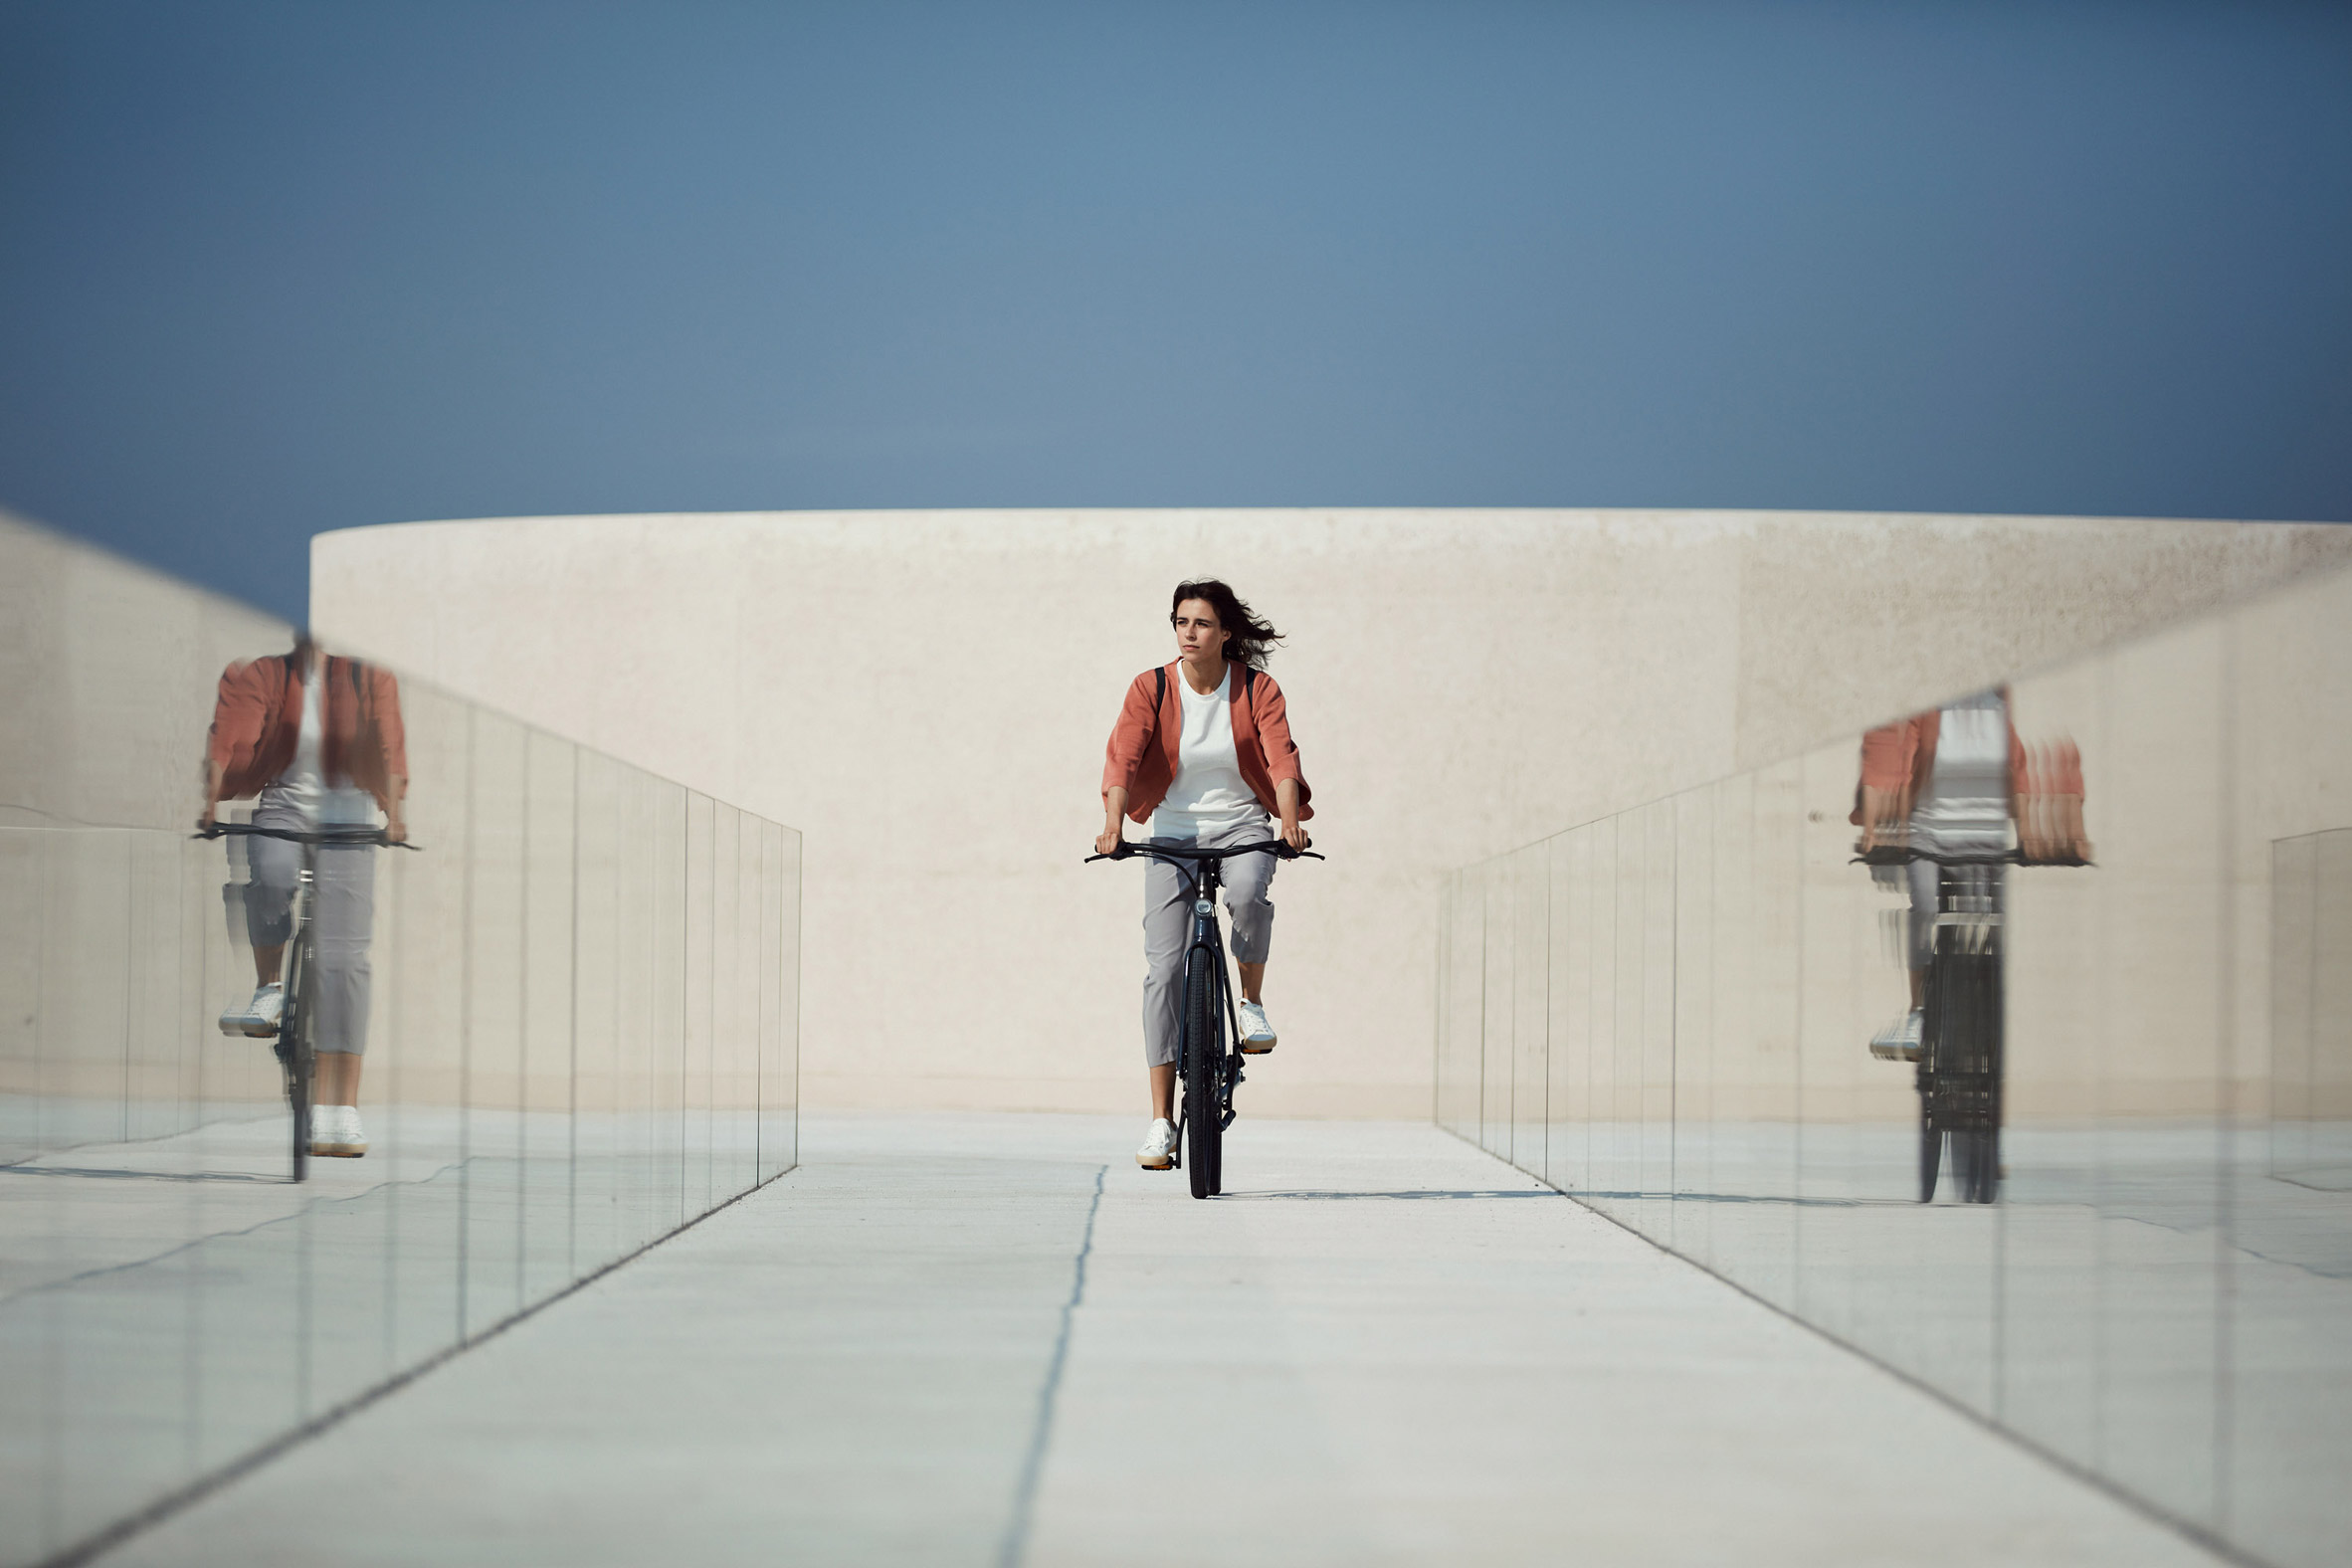 VanMoof launches lock-free Electrified bike that can "take care of itself"